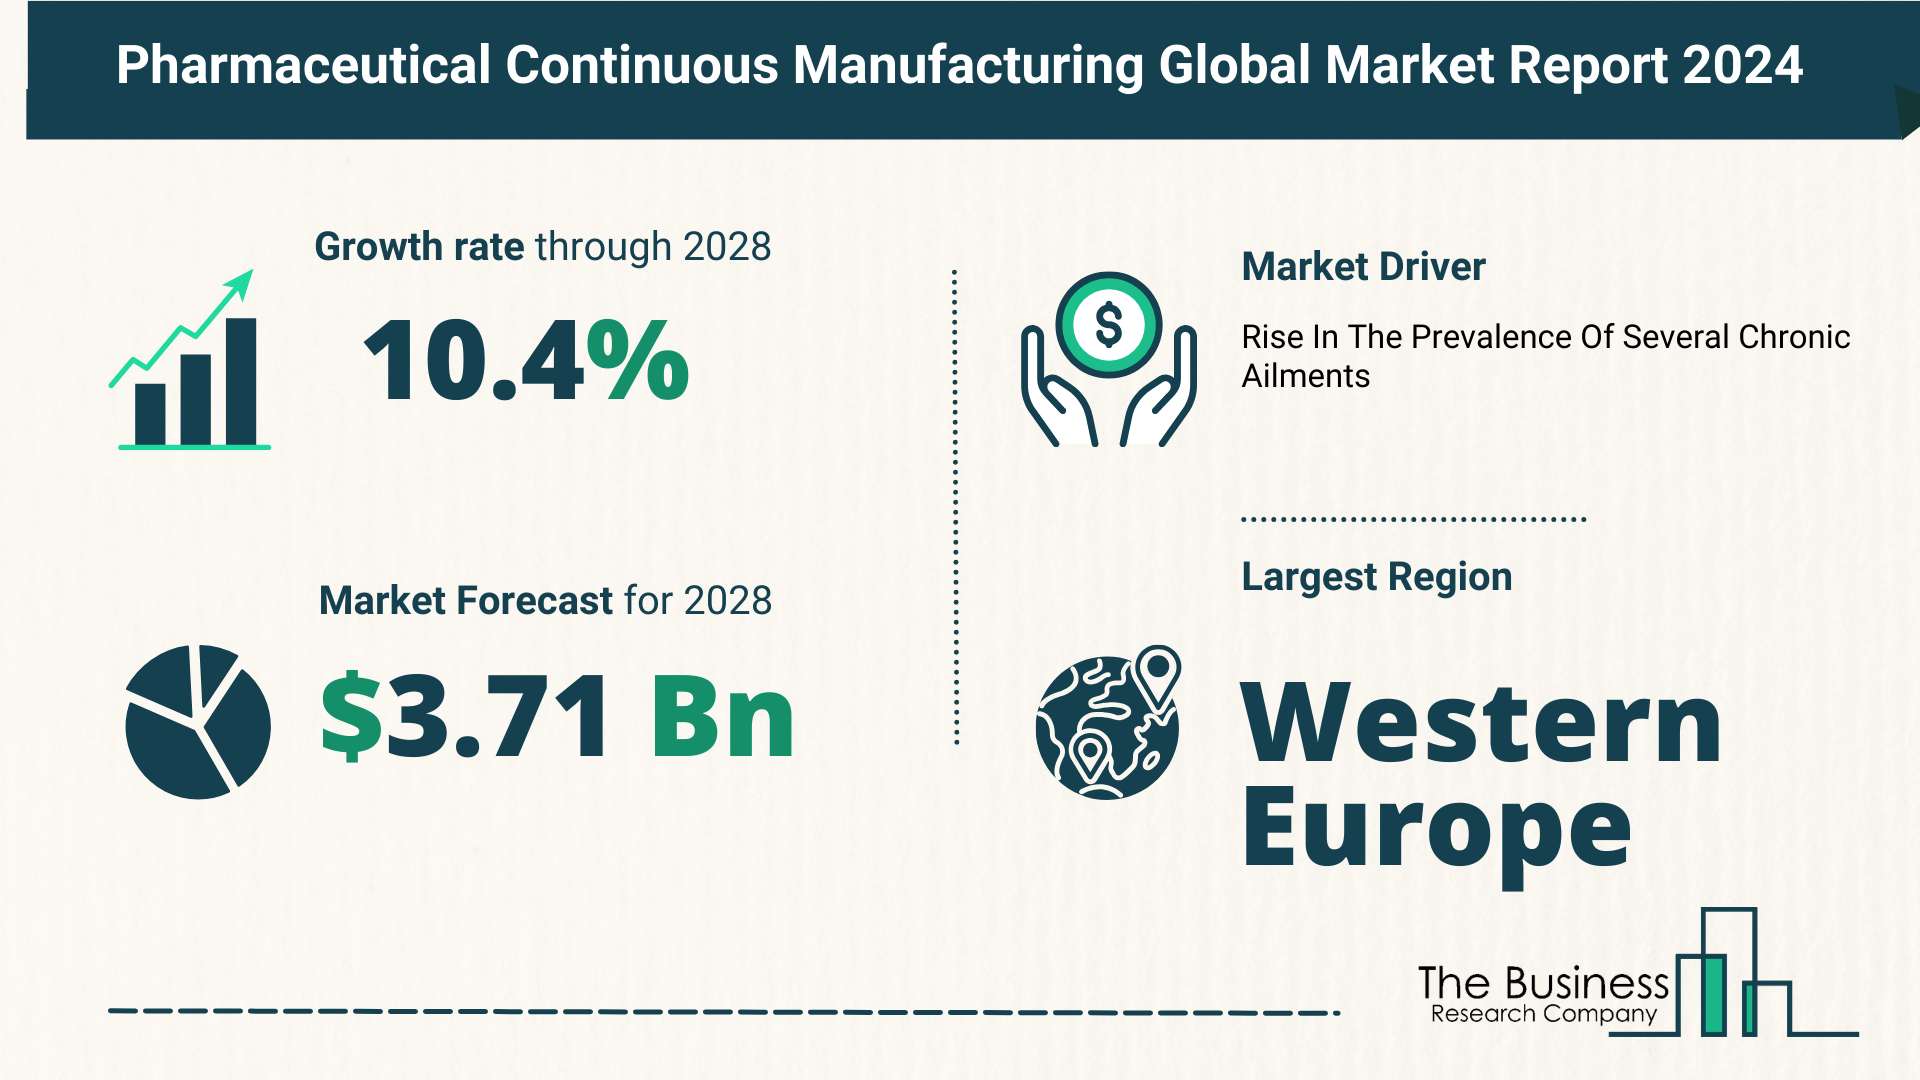 Global Pharmaceutical Continuous Manufacturing Market